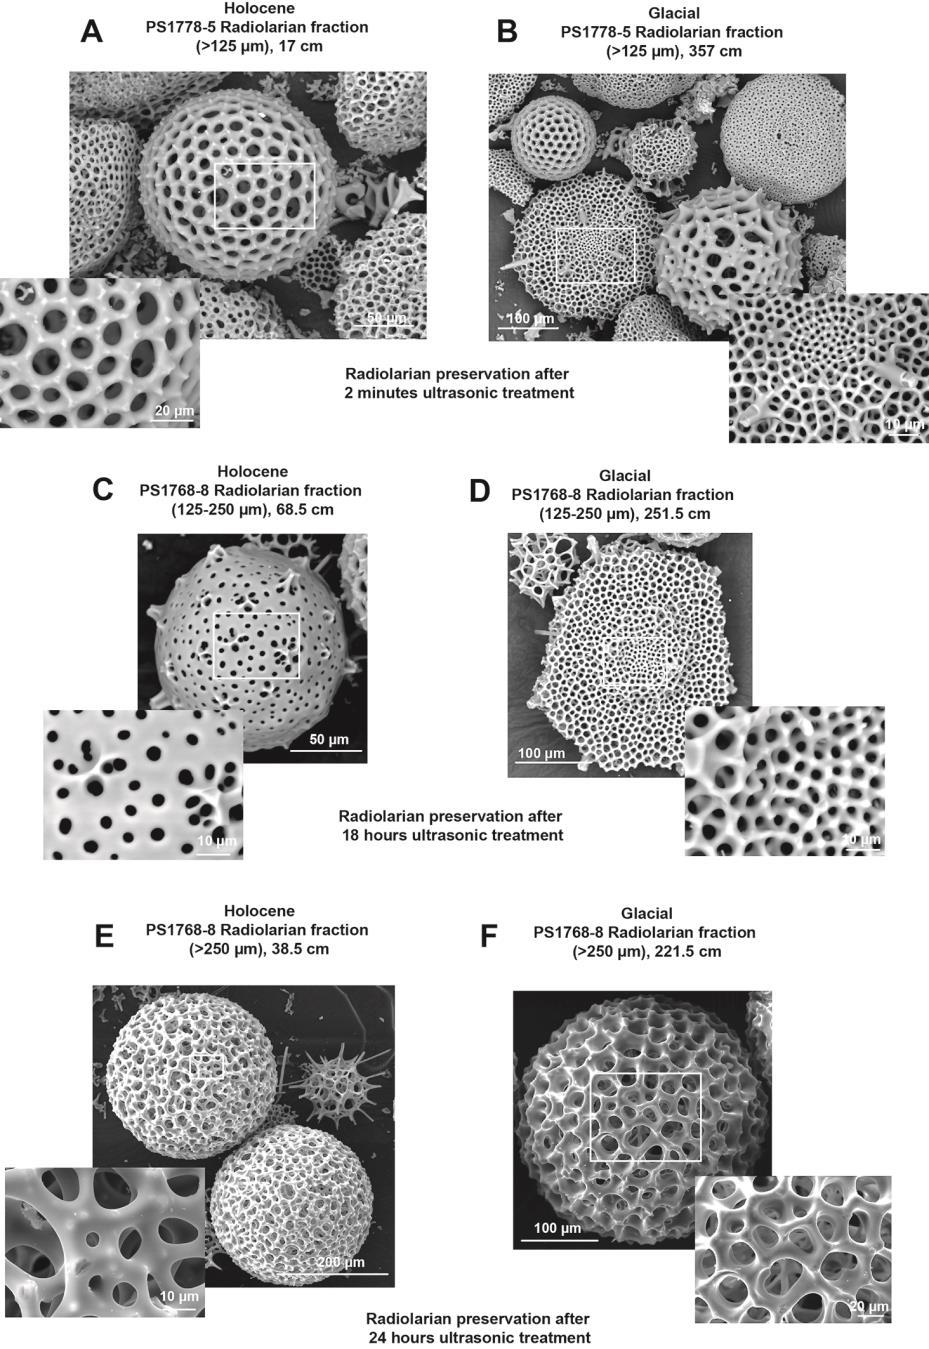 Supplementary Figure 4. Scanning Electron Microscope (SEM) images of pure radiolarian fractions. (A, B) Images from Holocene and glacial radiolarian fractions (>125 µm) from core PS1778-5.